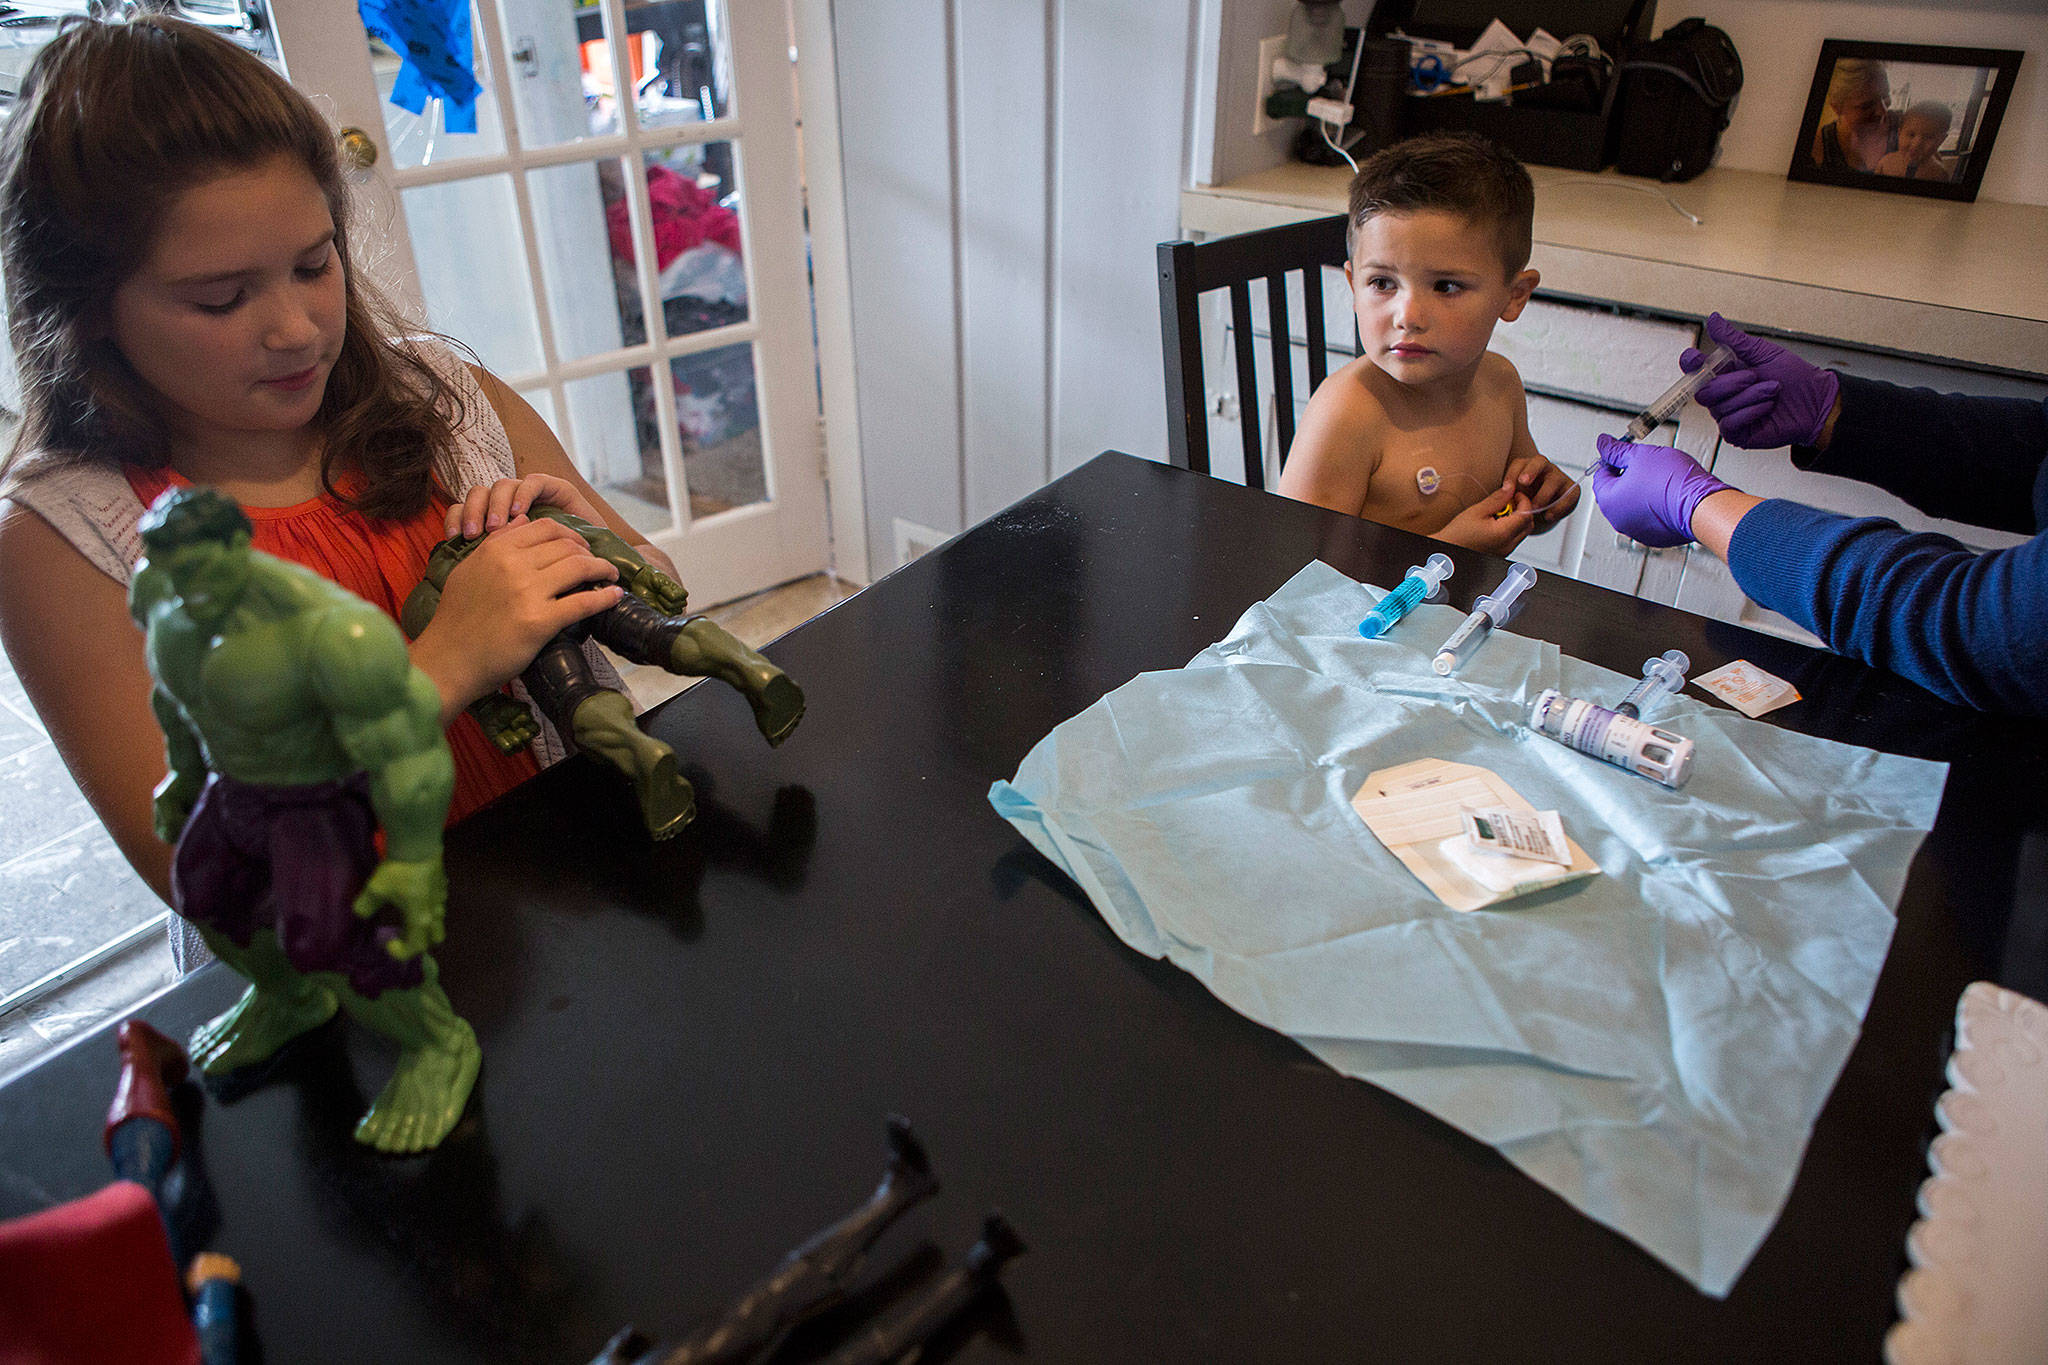 Samuel Avalos, 4, gets treatment for his hemophilia from his mother as his sister brings out some of his hulk action figures at their family’s home on Aug. 30 in Snohomish. (Olivia Vanni / The Herald)